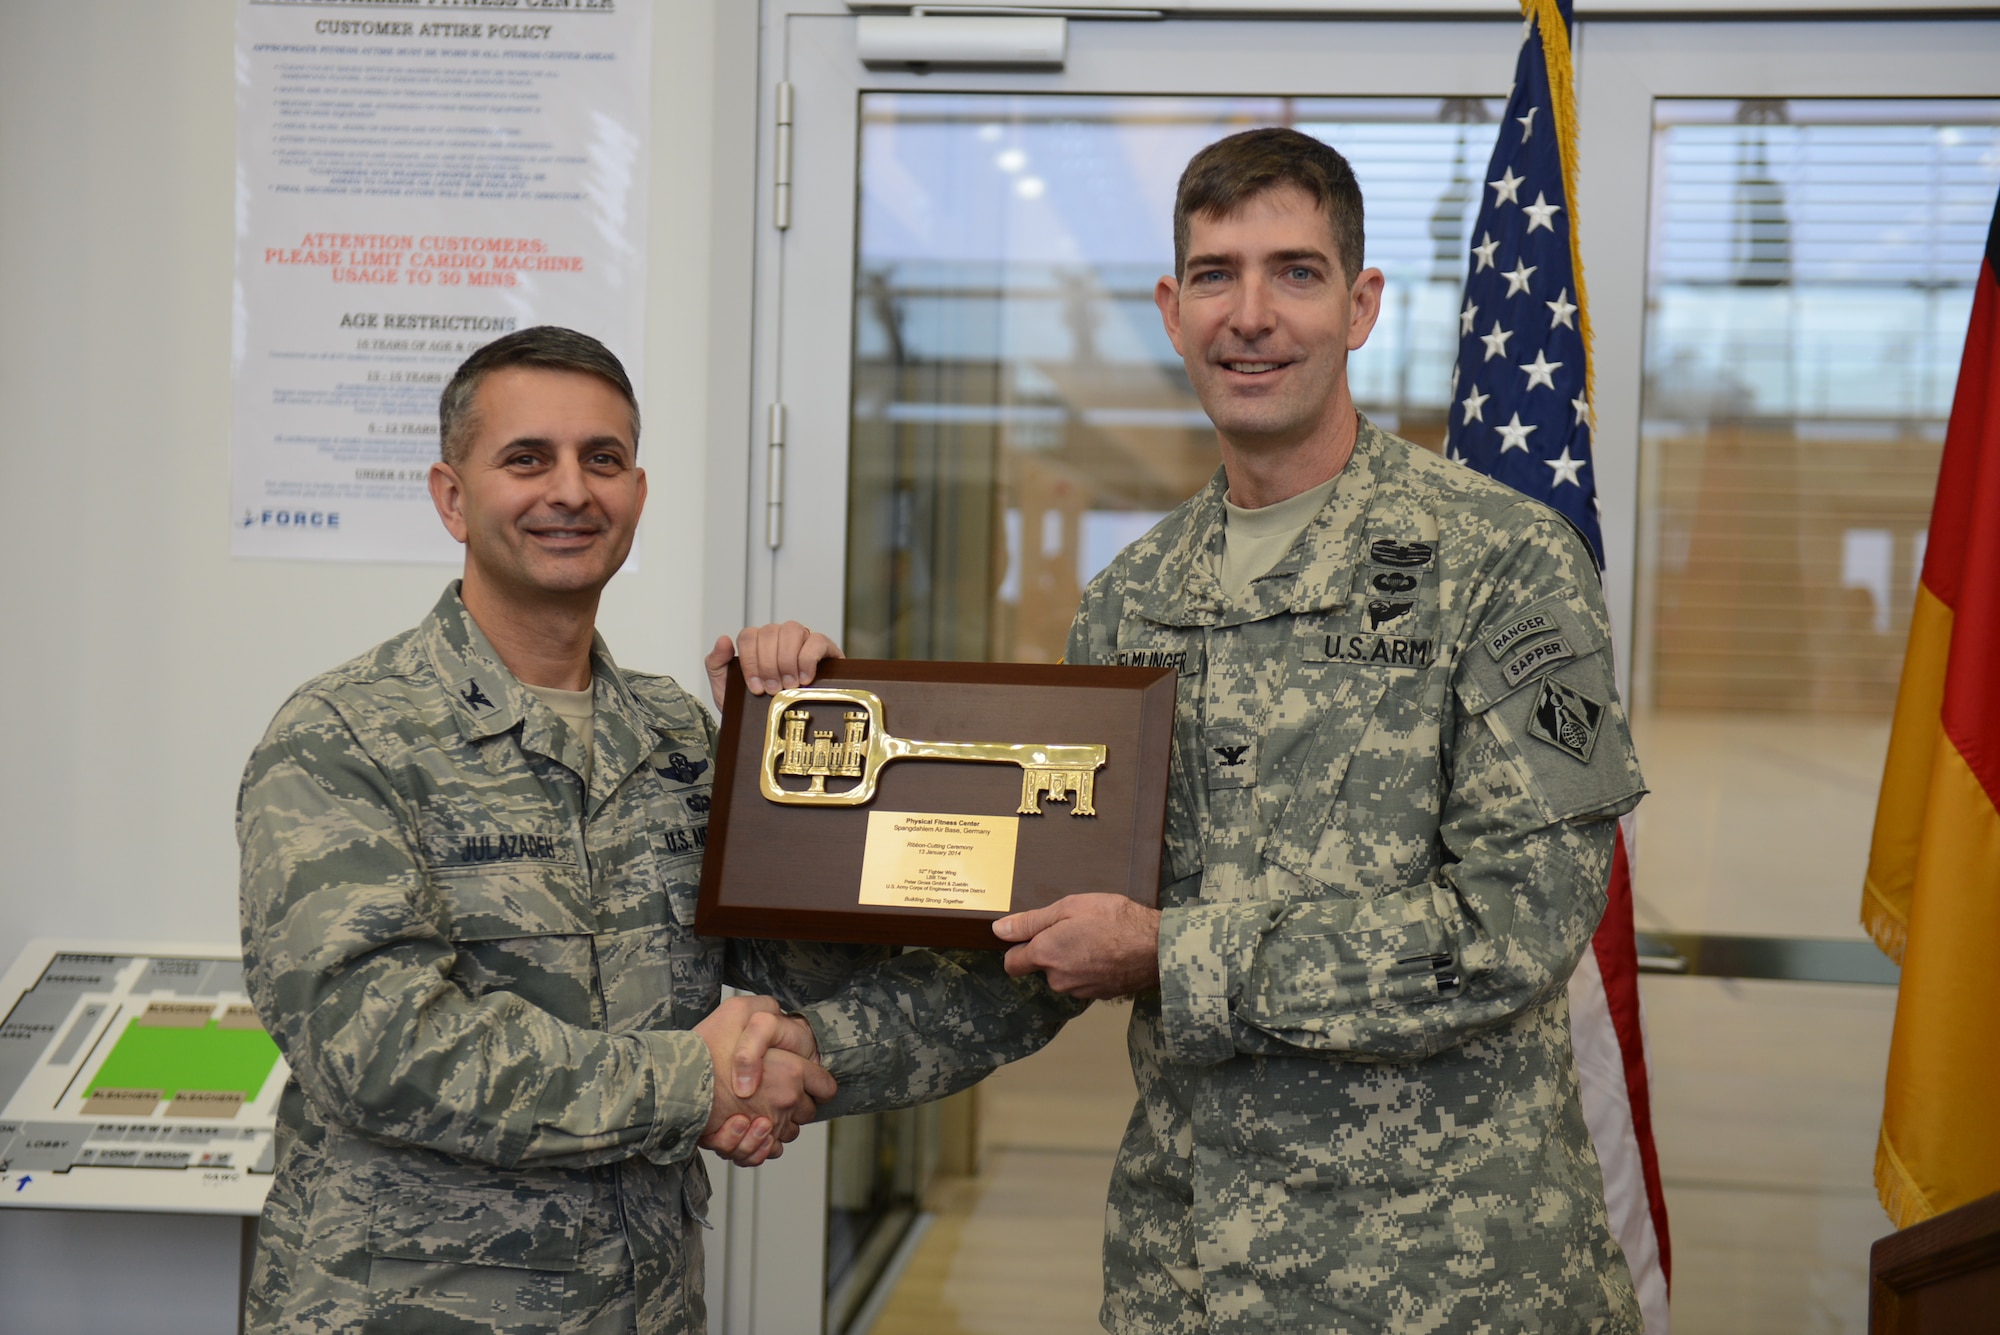 SPANGDAHLEM AIR BASE, Germany – U.S. Air Force Col. David Julazadeh, 52nd Fighter Wing commander, left, receives the ceremonial key to the new fitness center from U.S. Army Col. Pete Helmlinger, commander of U.S. Army Corps of Engineers Europe district, during a ribbon cutting ceremony Jan. 13, 2014. Construction of the new $23.5 million, 69,843 square foot facility began in July 2011. (U.S. Air Force photo by Senior Airman Gustavo Castillo/Released)